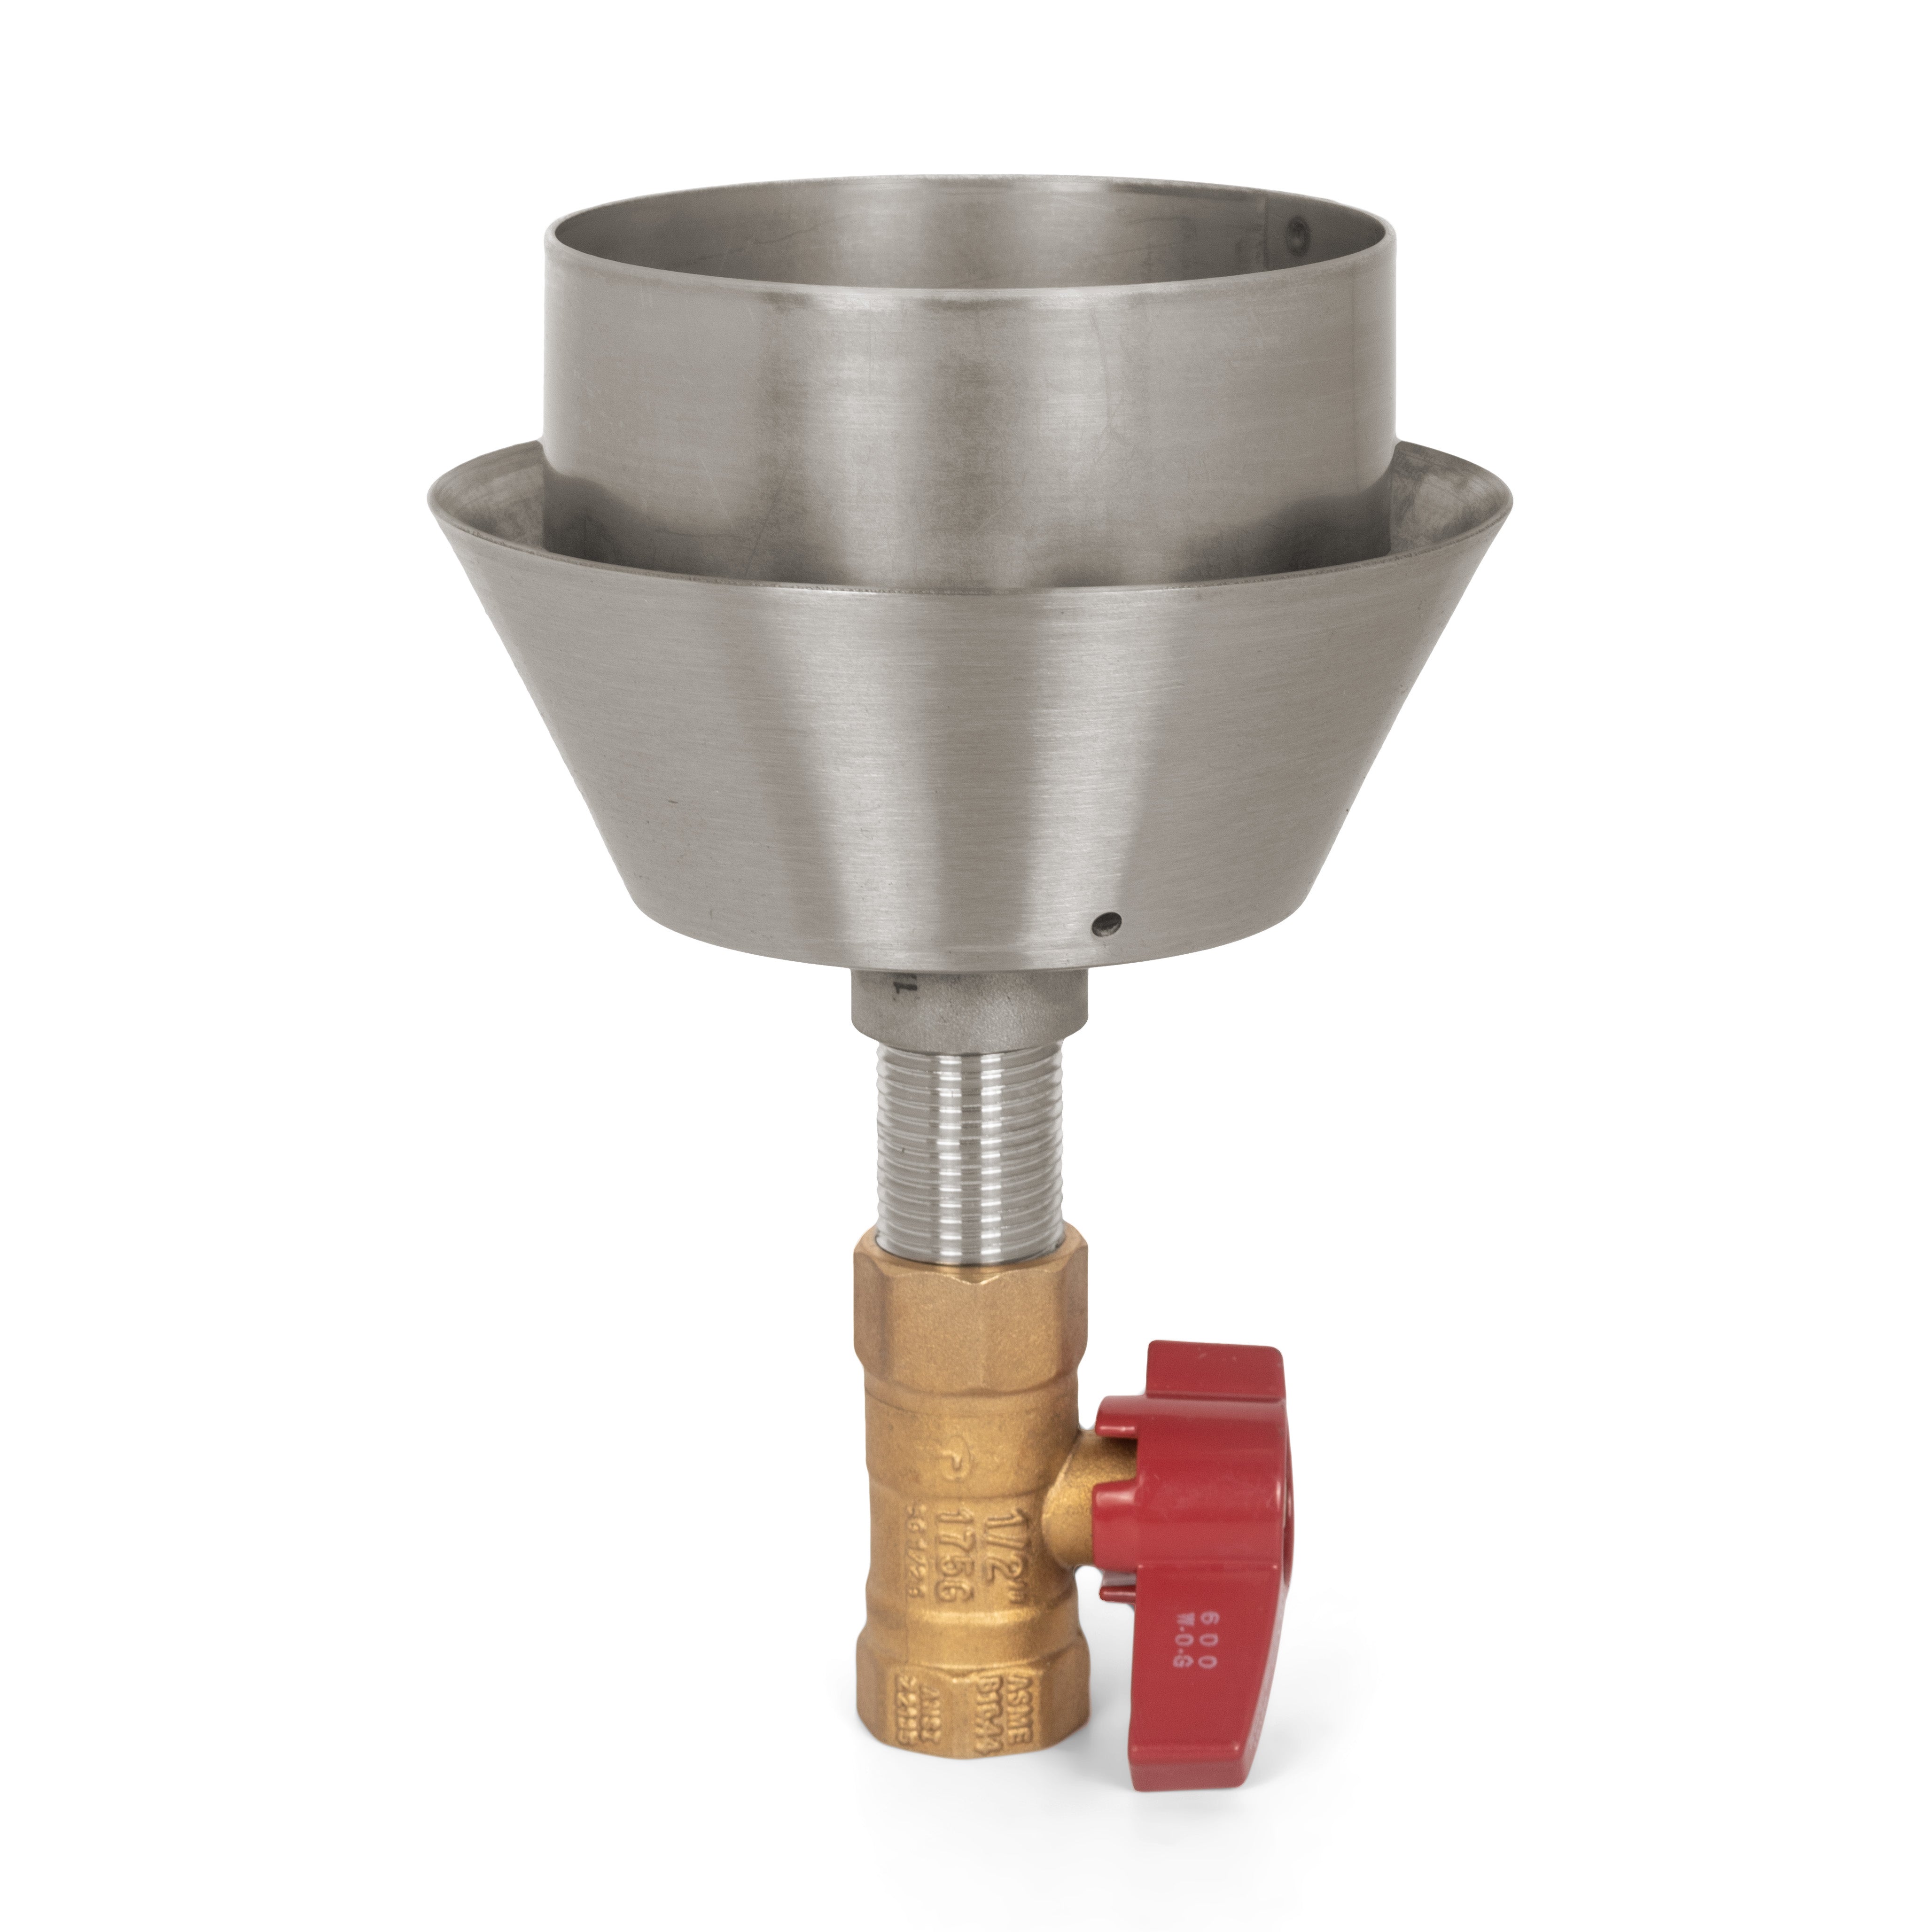 The Outdoor Plus Roman Torch with TOP Base -Stainless Steel- Manual Ball Valve